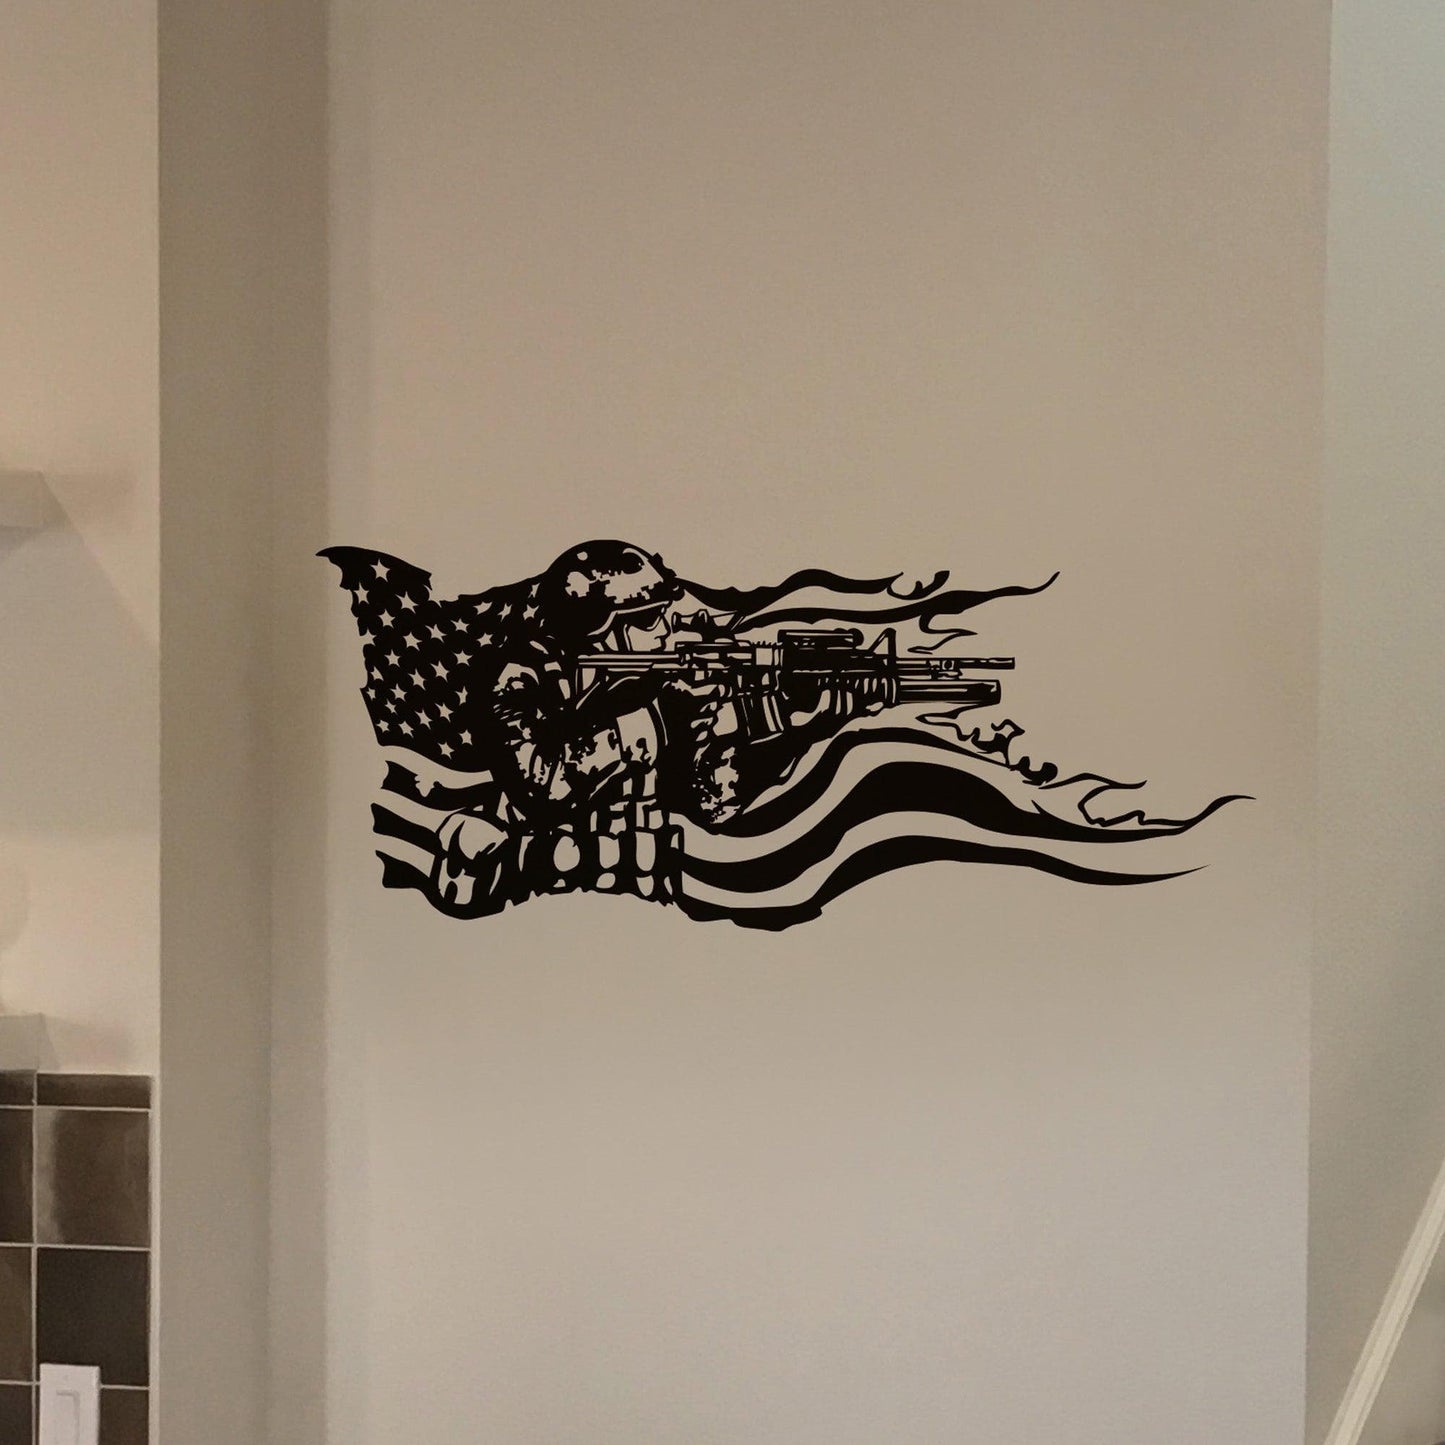 A black decal on a white wall showing a soldier holding a gun and the American flag behind it. 